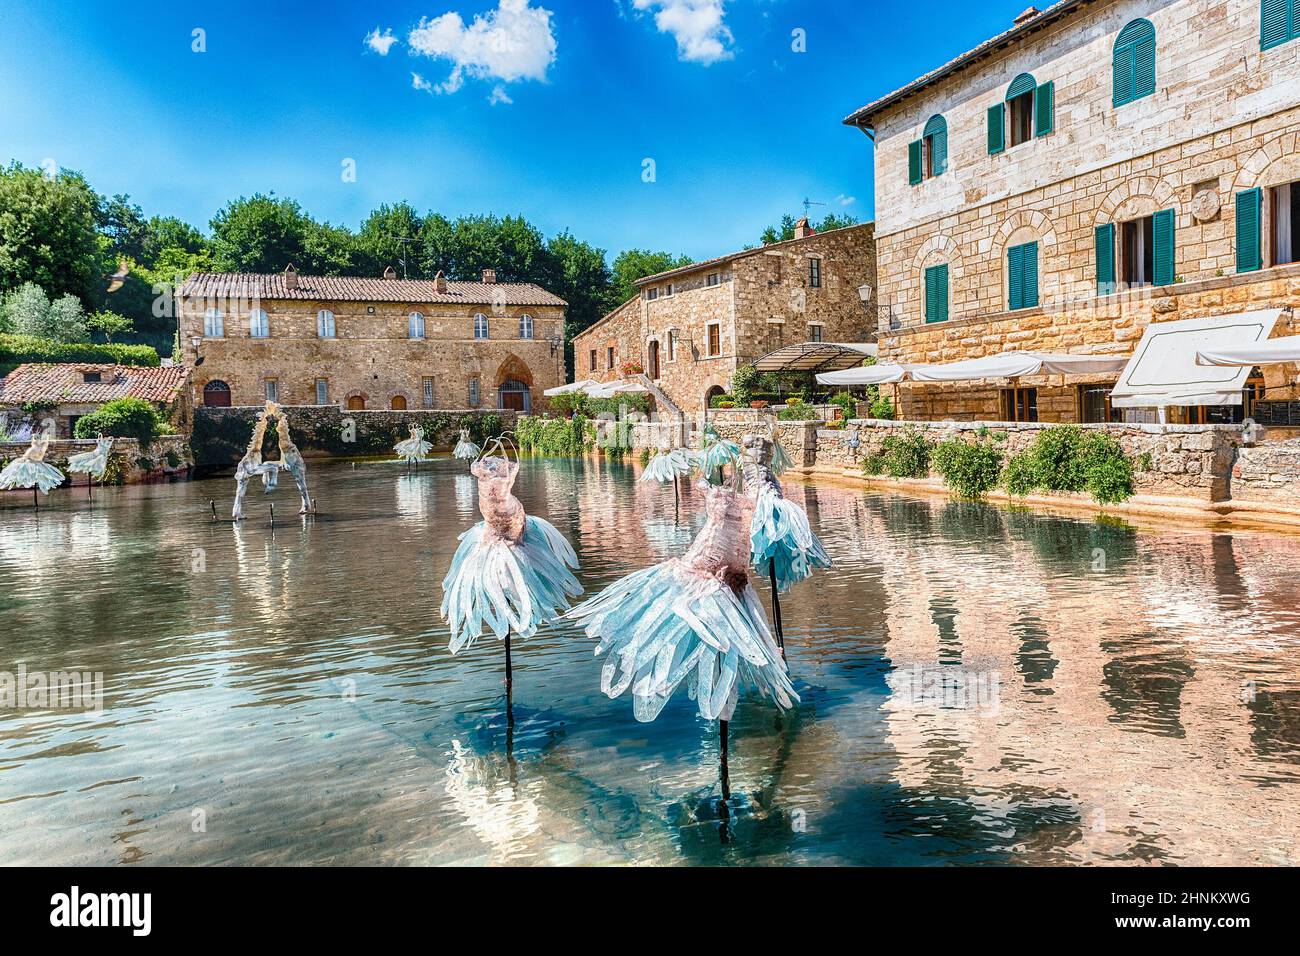 Medieval thermal baths in the town of Bagno Vignoni, Italy Stock Photo